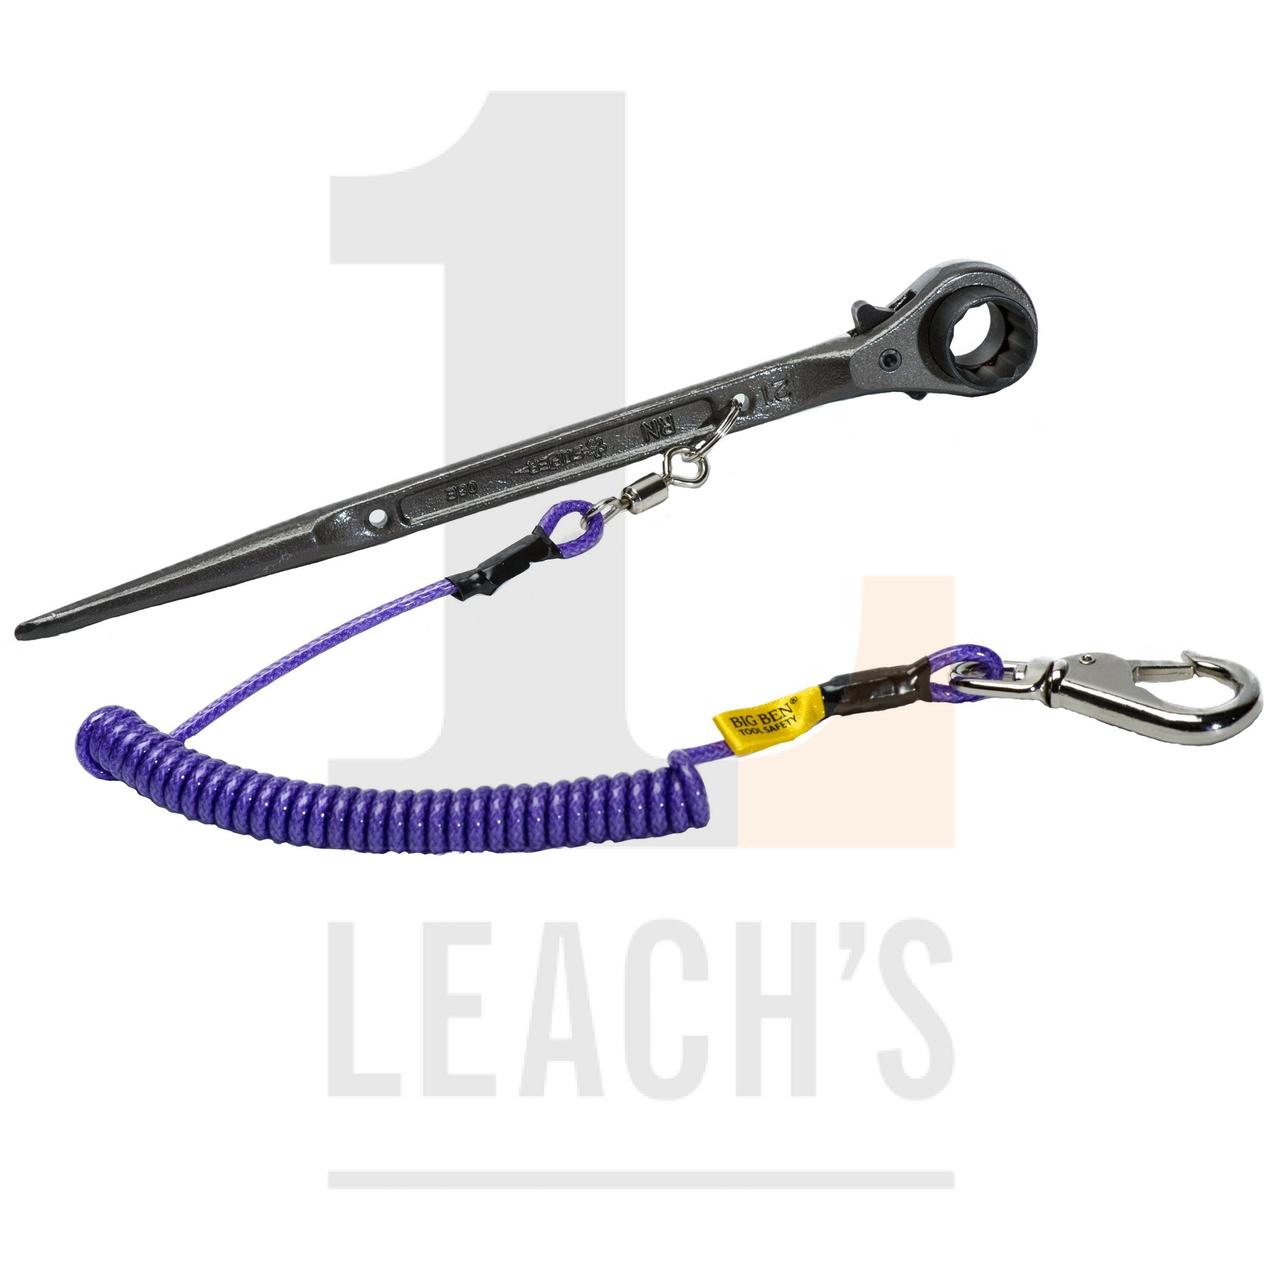 21mm Heavy Duty Podger Ratchet, Box one side c/w HD Tool Safety Rope with Spring Clip / 21мм сверхмощный ключ - фото 1 - id-p105318447